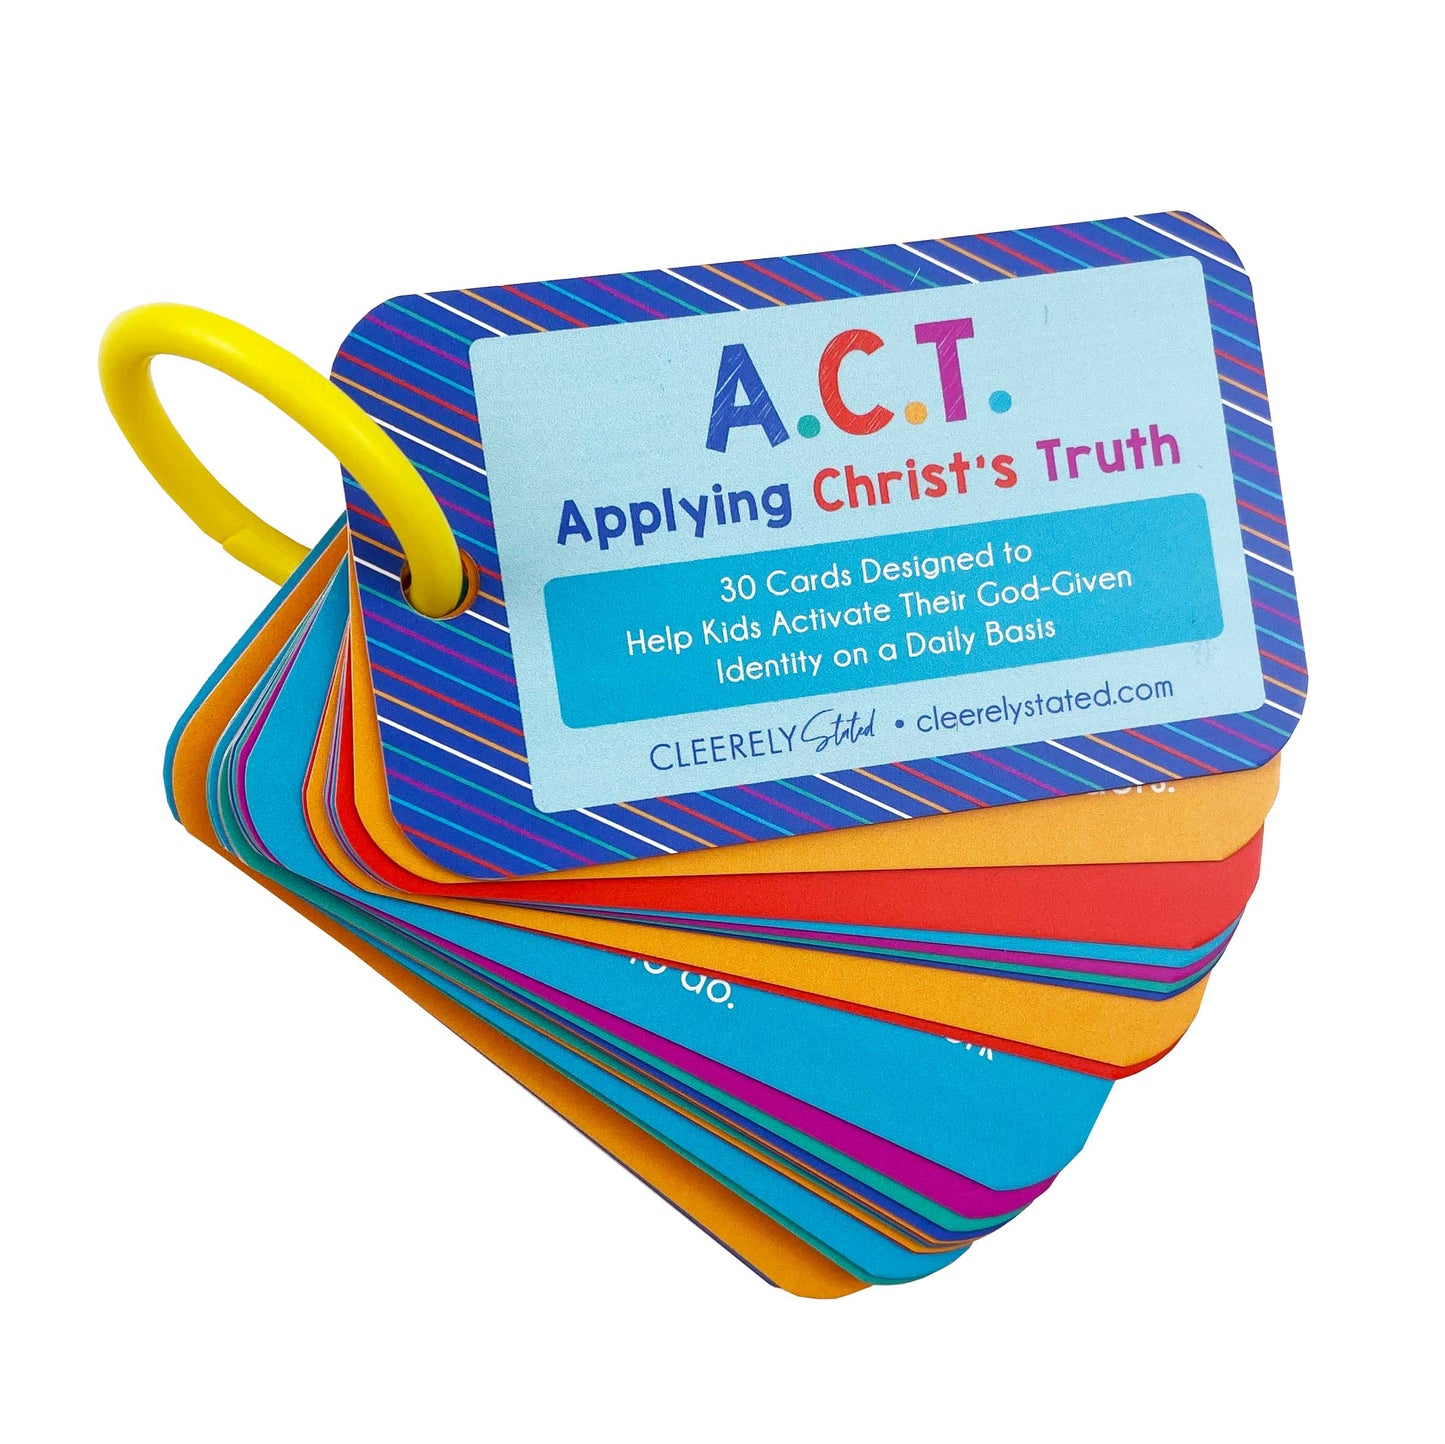 A.C.T. mini cards for Kids